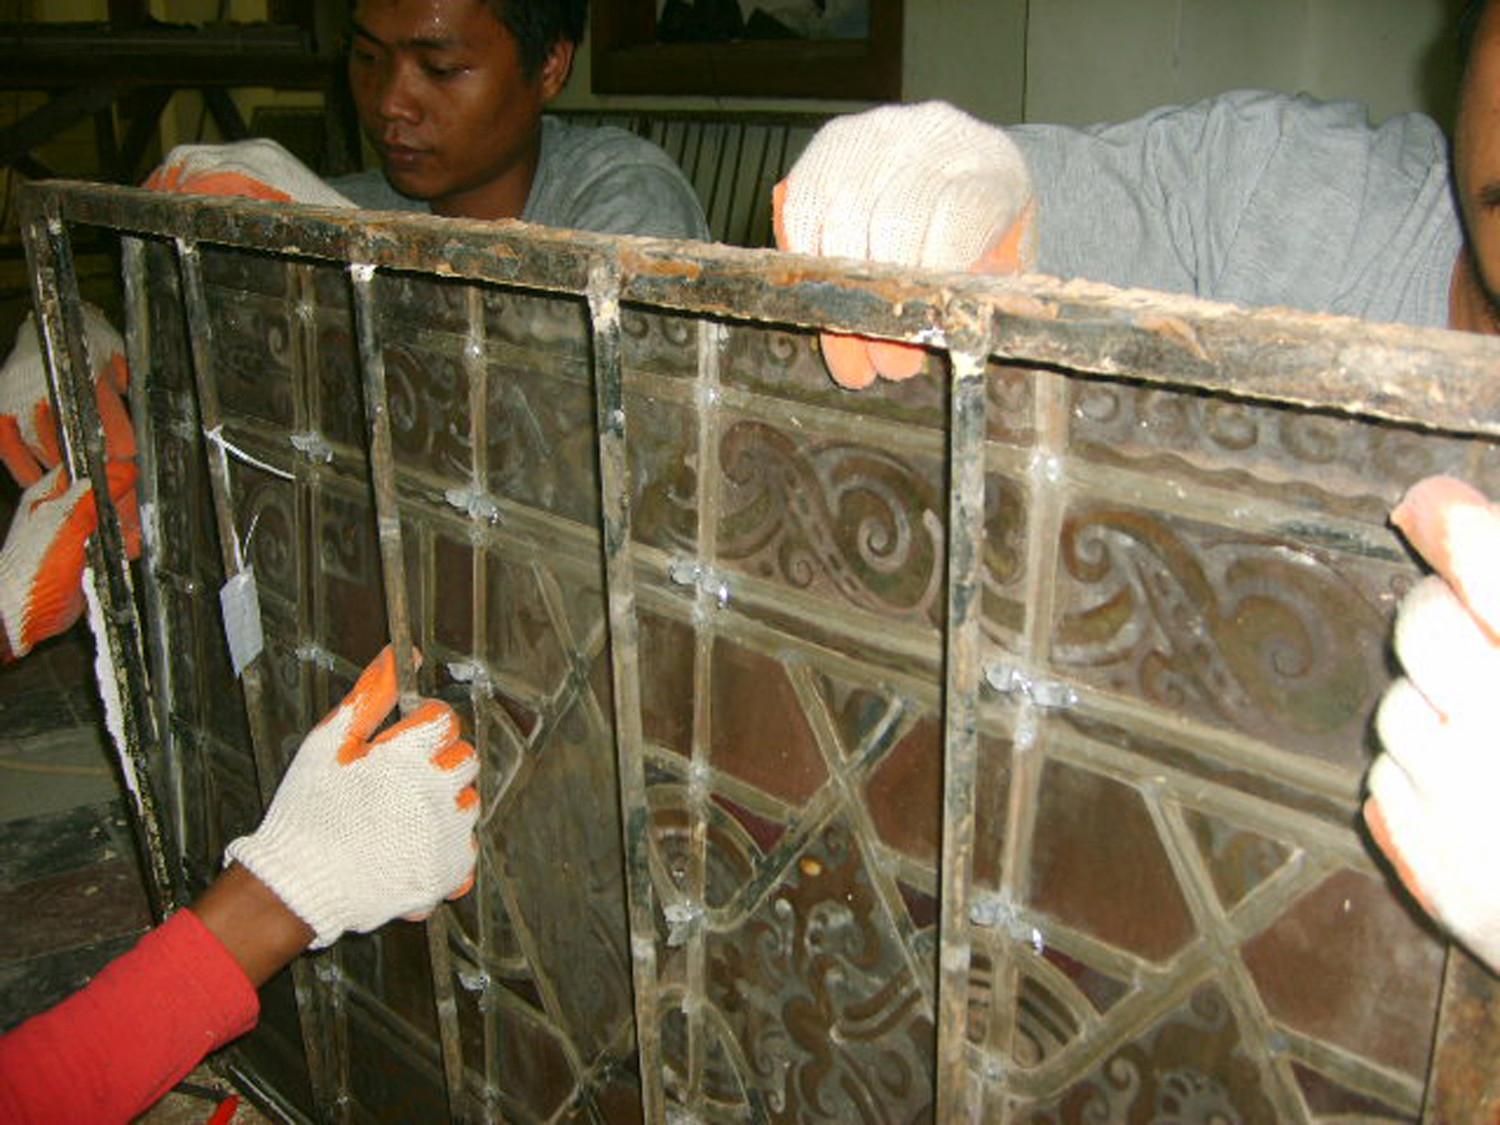 Conservation and repair of the stained glass. All the frame already damage by rust and the stained frame are broken in some parts.